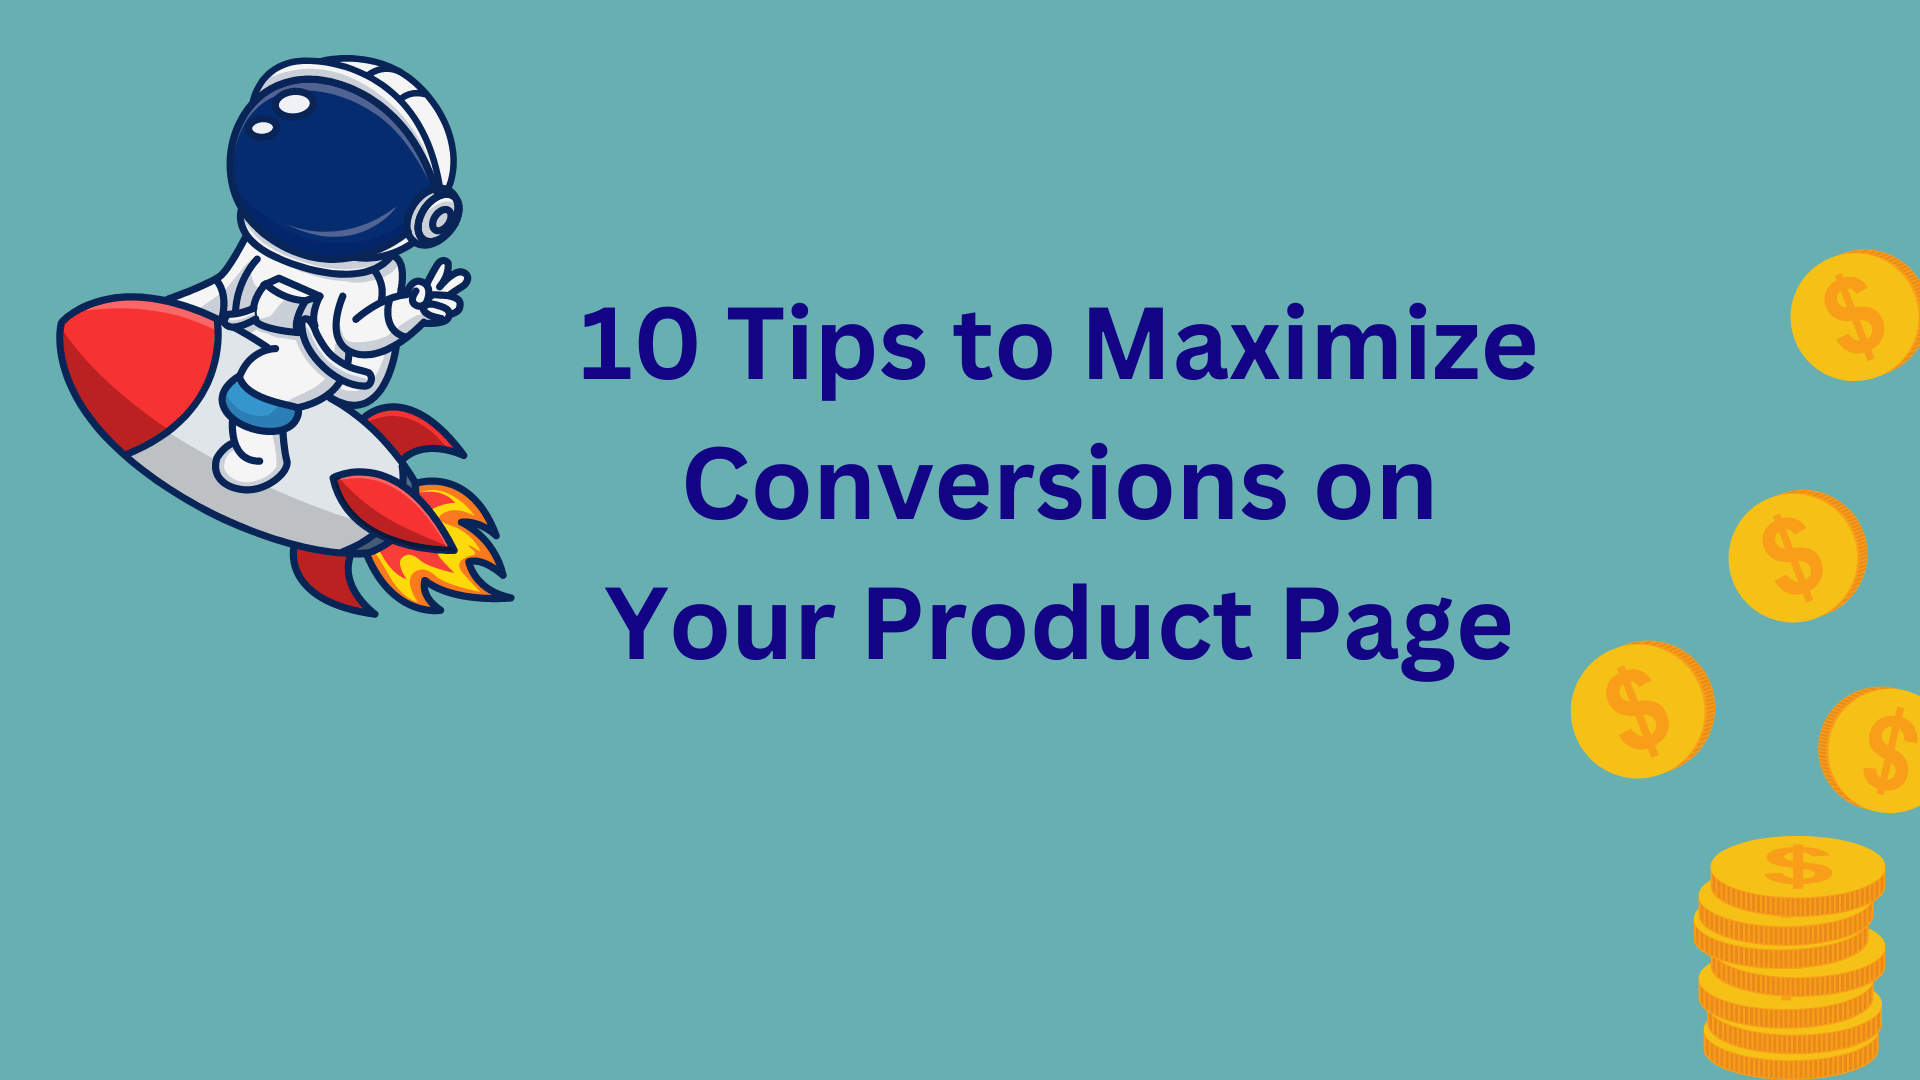 10 Tips to Maximize Conversions on Your Product Page